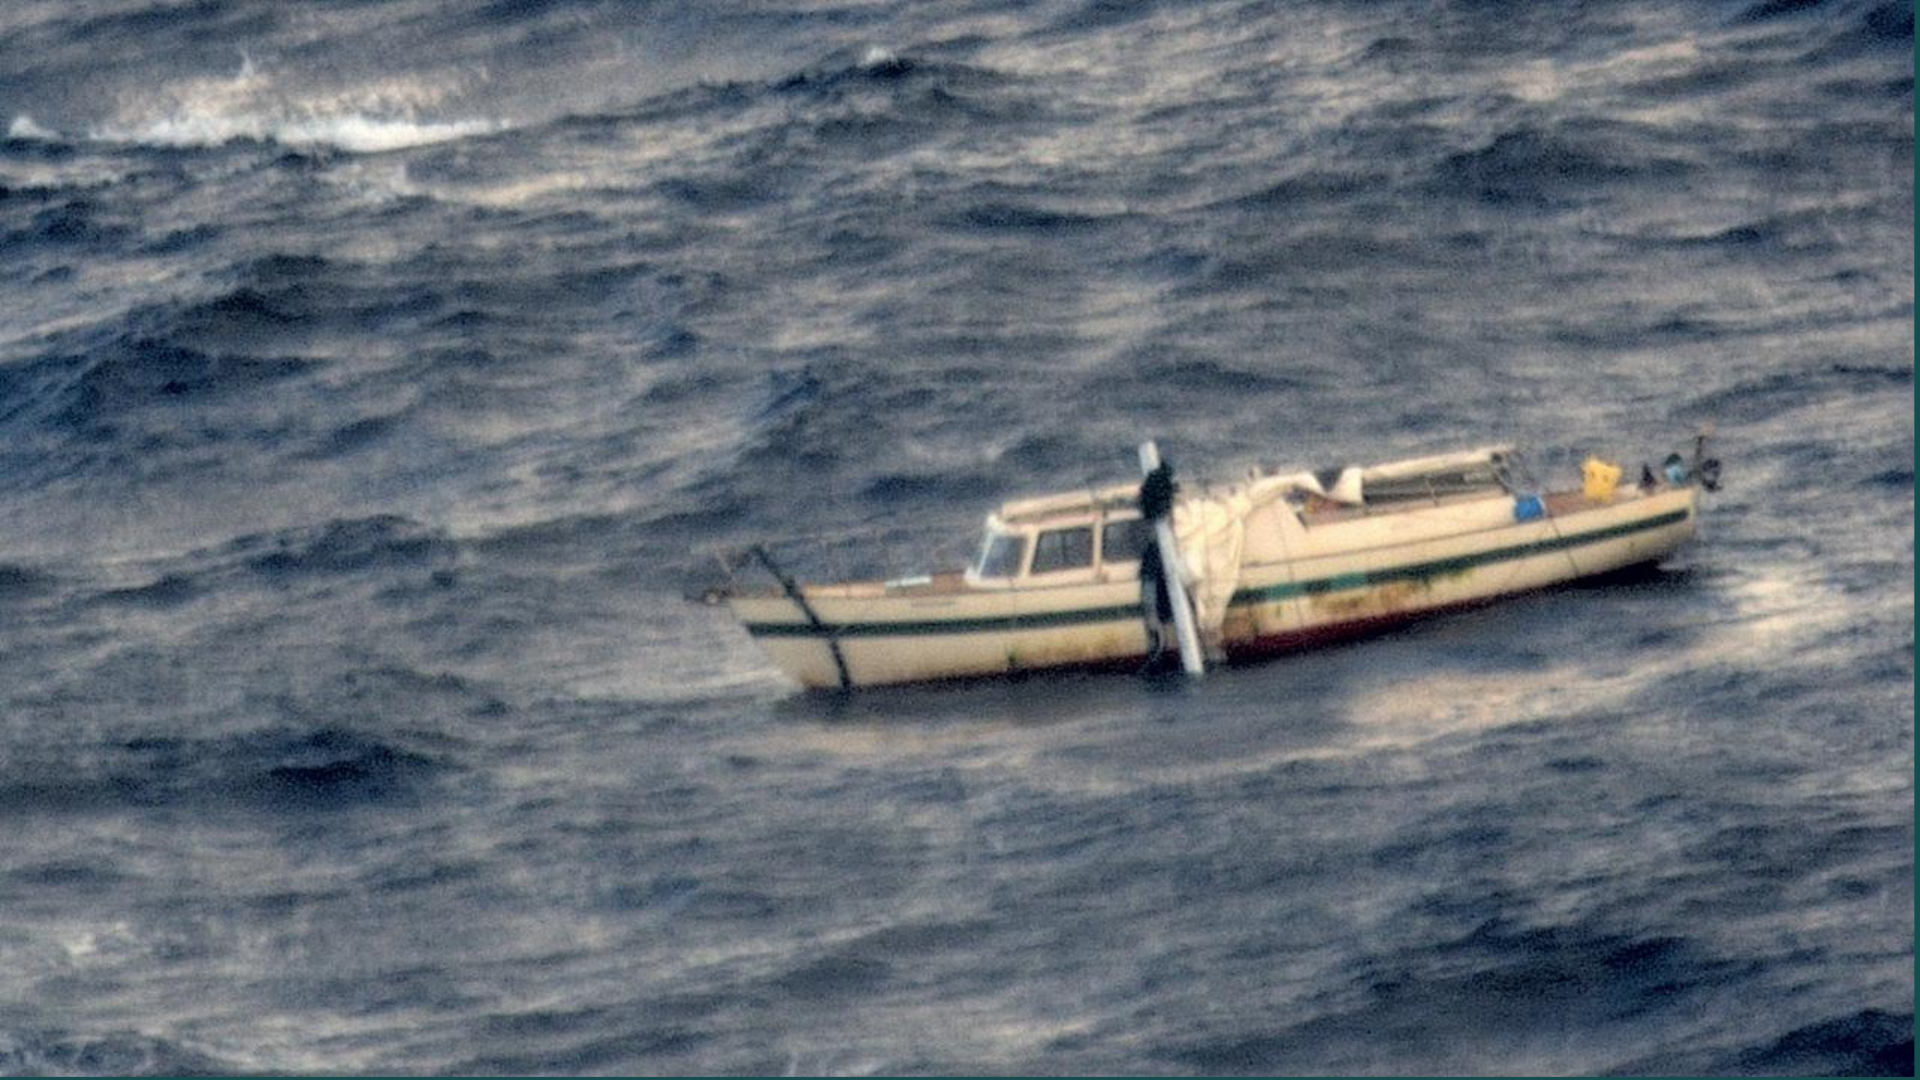 A stricken sailor's yacht lost its mast in stormy conditions. 